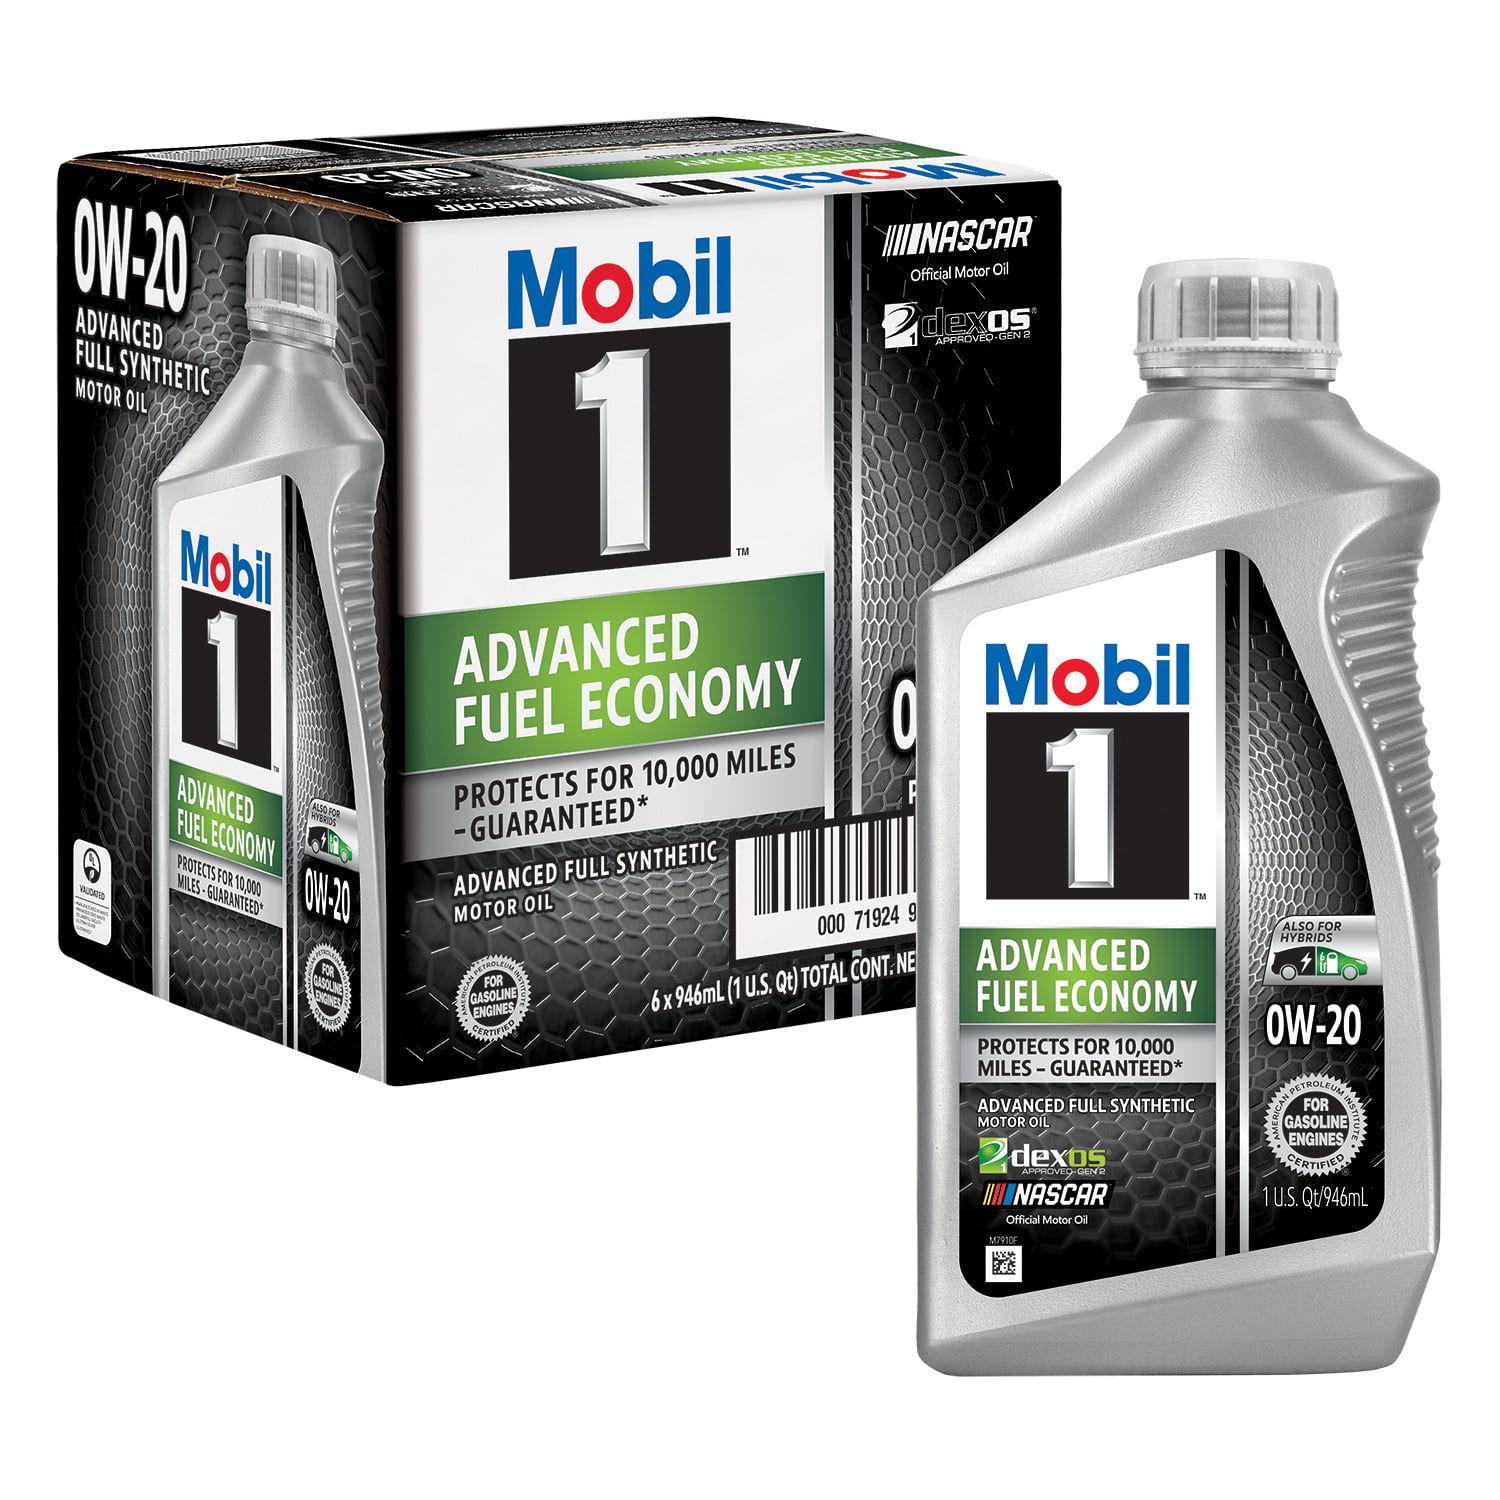 Where To Buy Mobil 1 Oil